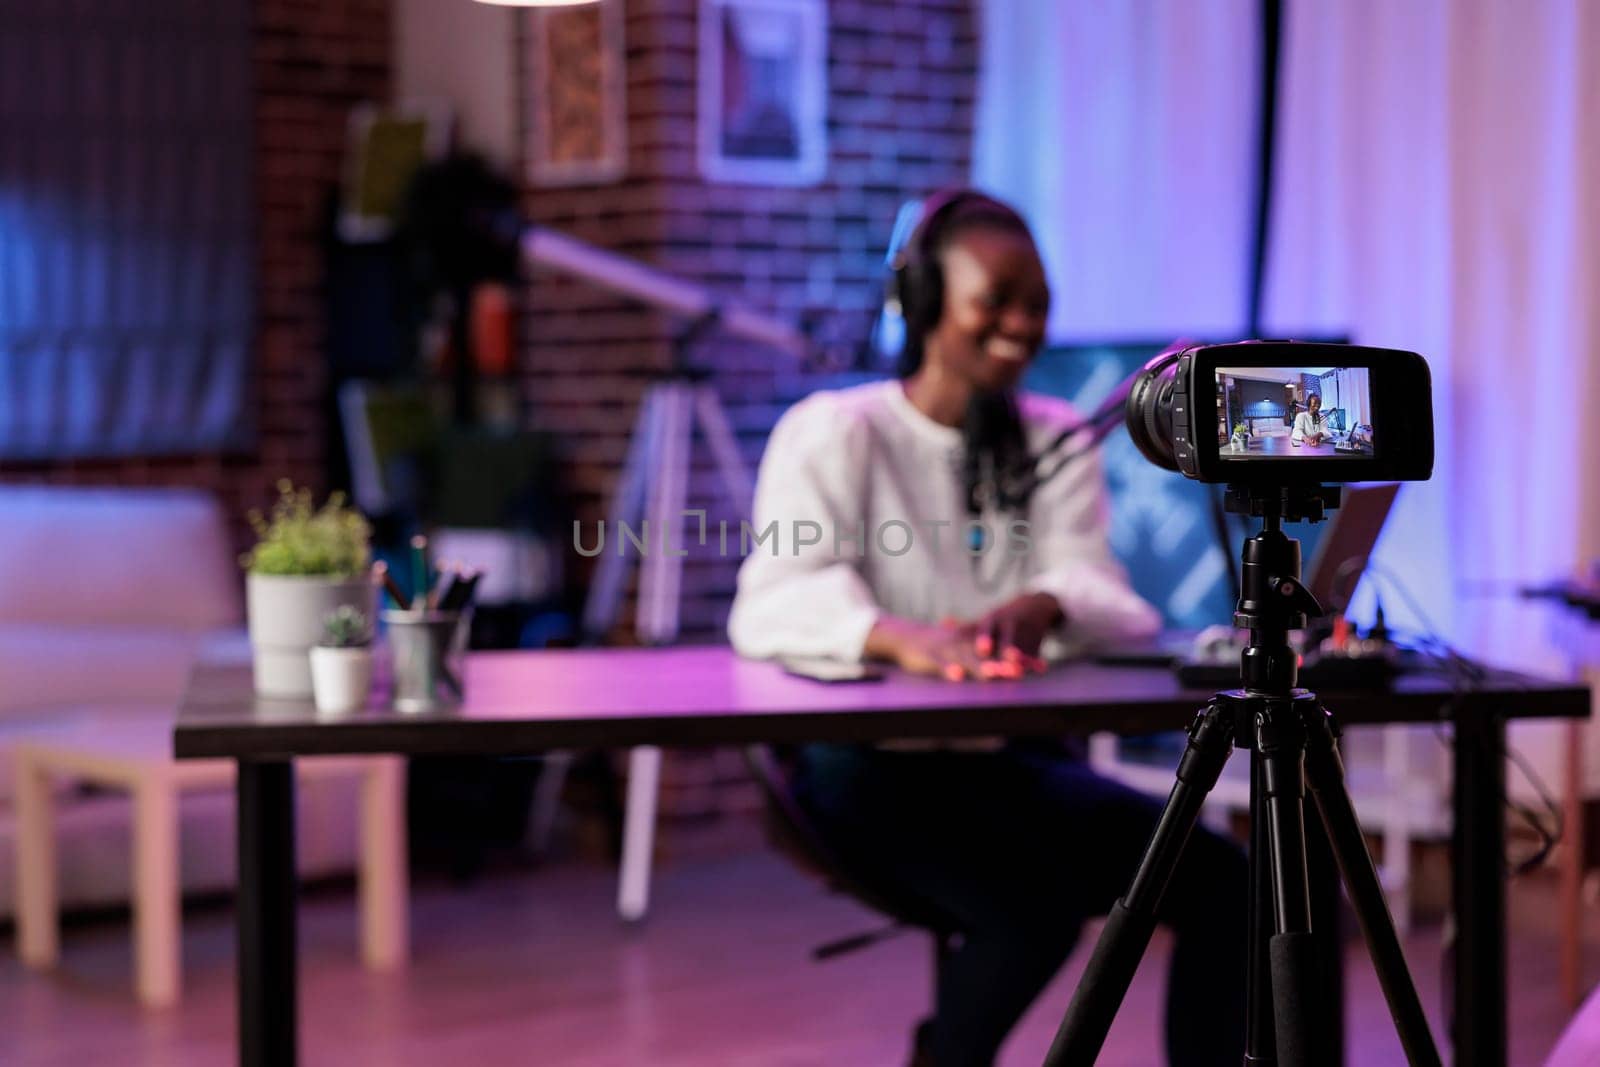 Focus shot on modern camera recording vlogger in blurry background talking about family and relationships subjects. Woman producing online show using high quality equipment in rgb lights studio